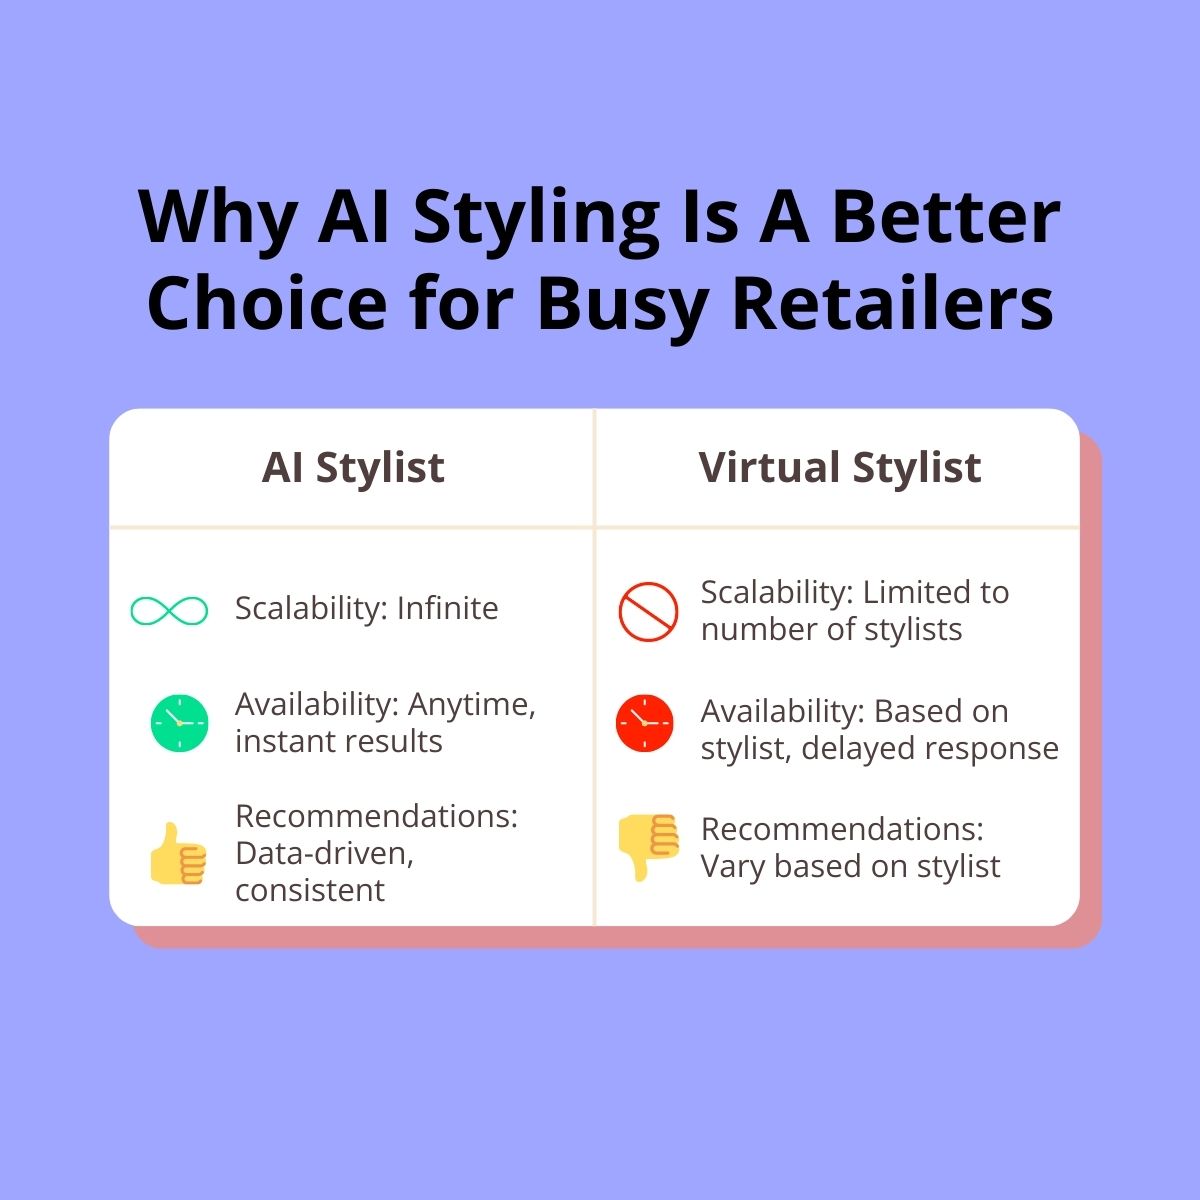 Virtual stylists versus AI stylists and why AI styling is better